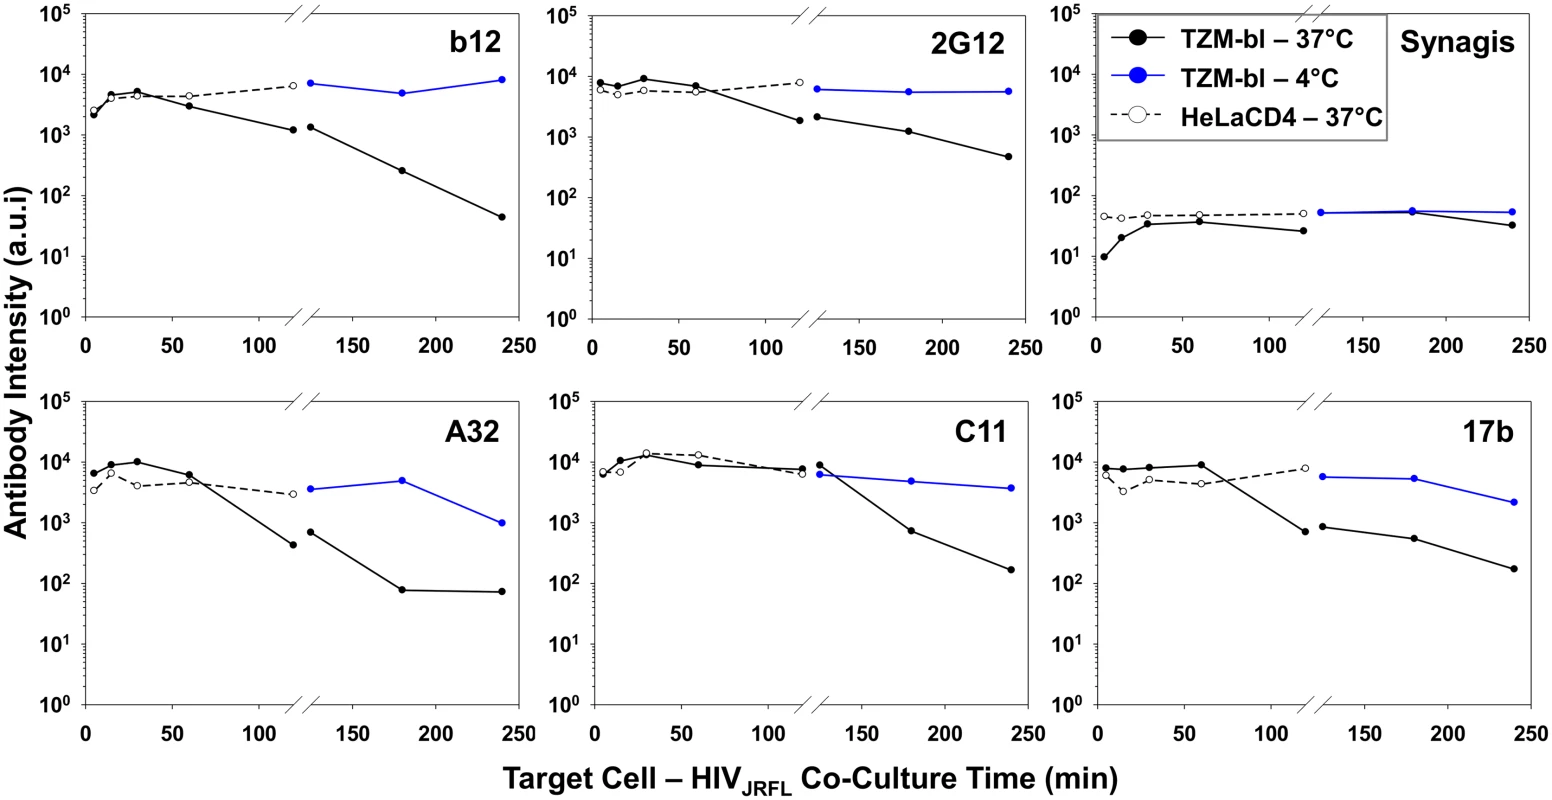 Influence of co-receptor expression, temperature and time on the exposure of gp120 epitopes on cell-bound HIV<sub>JRFL</sub> virions.